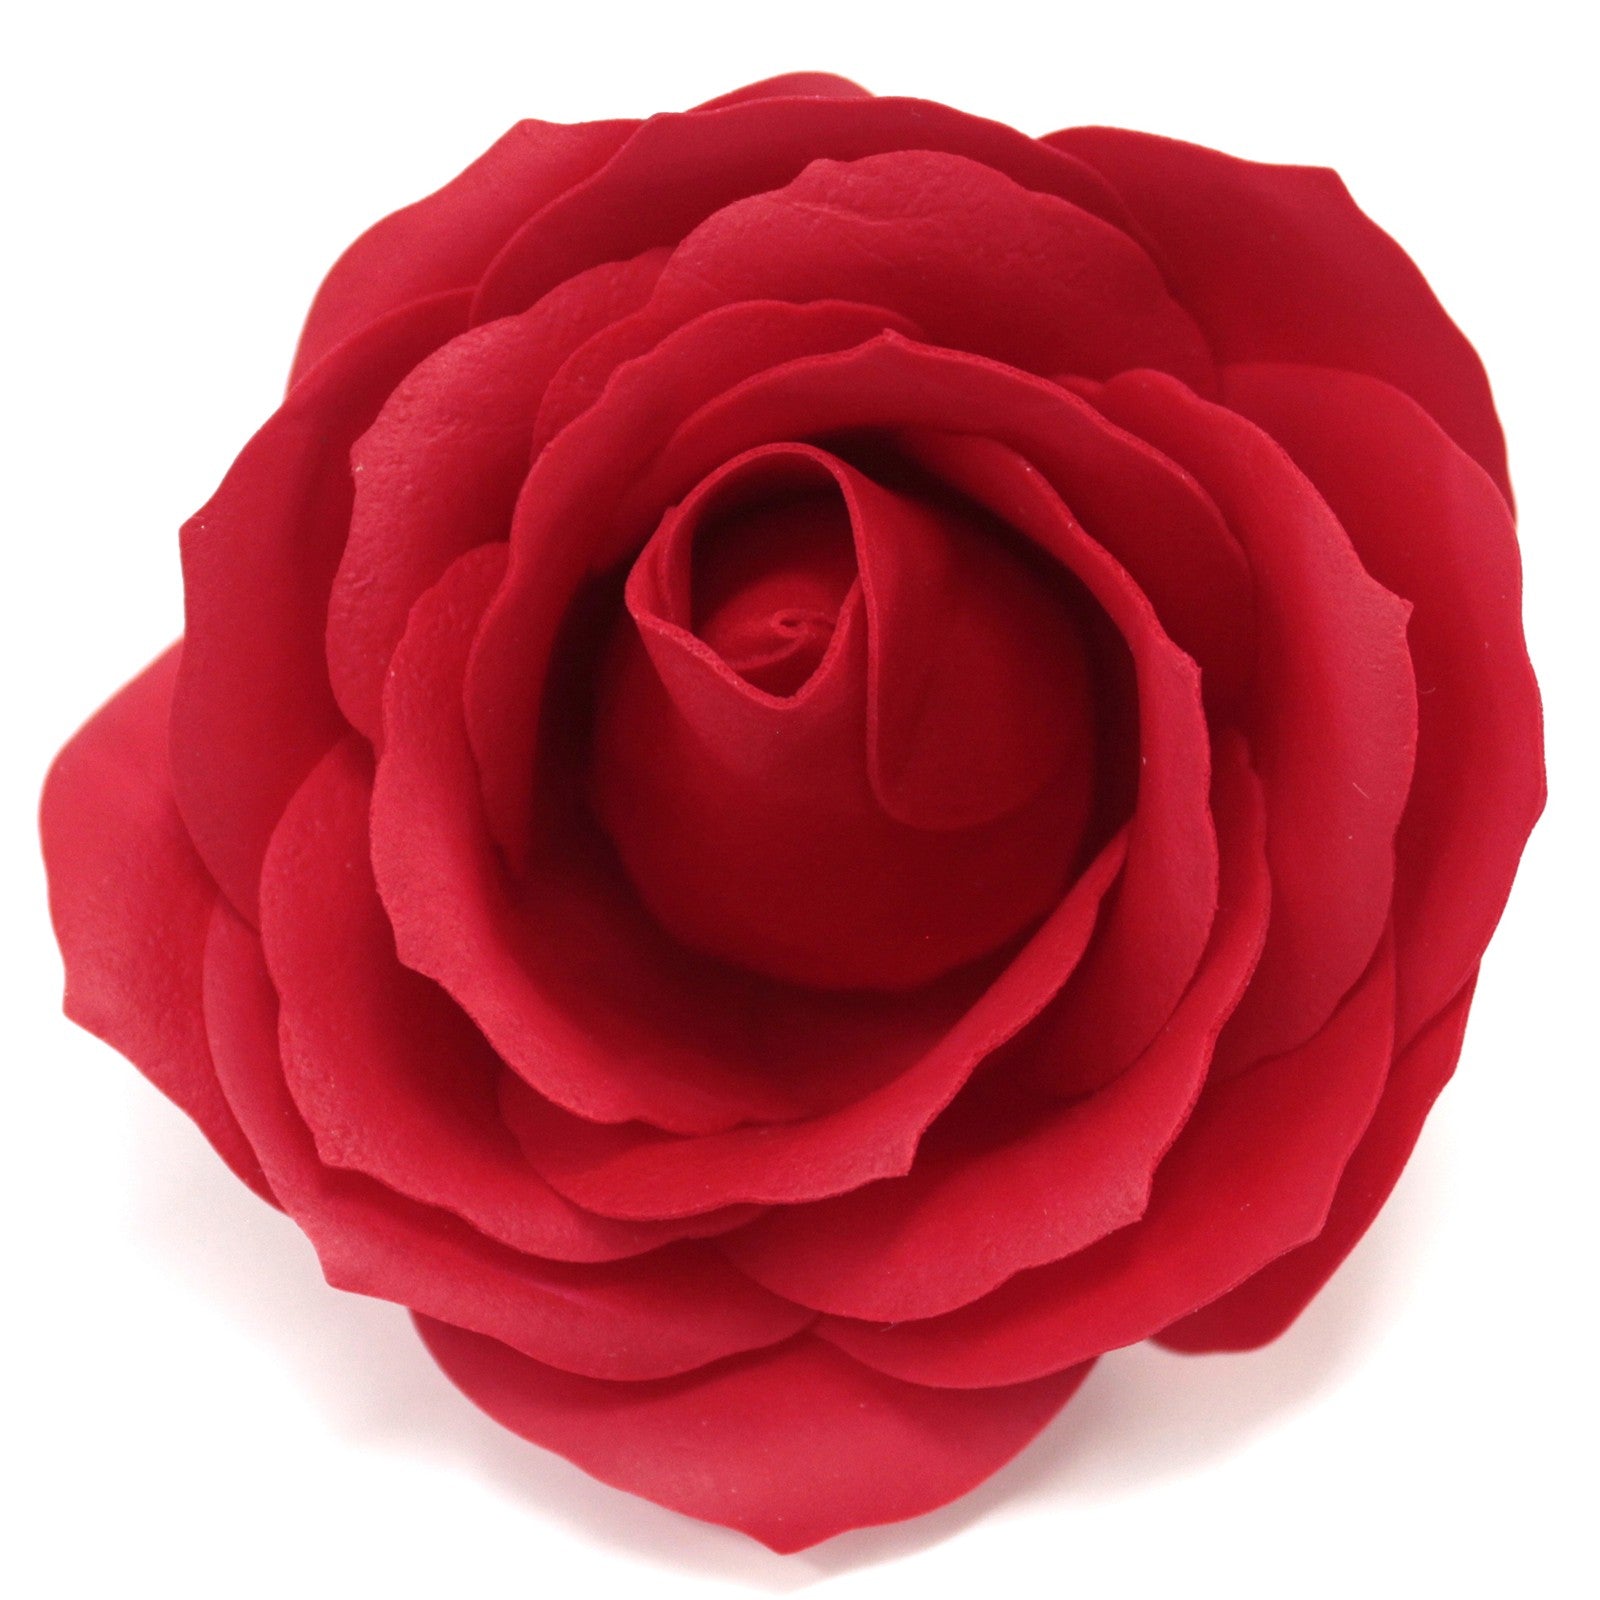 View Craft Soap Flowers Lrg Rose Red information